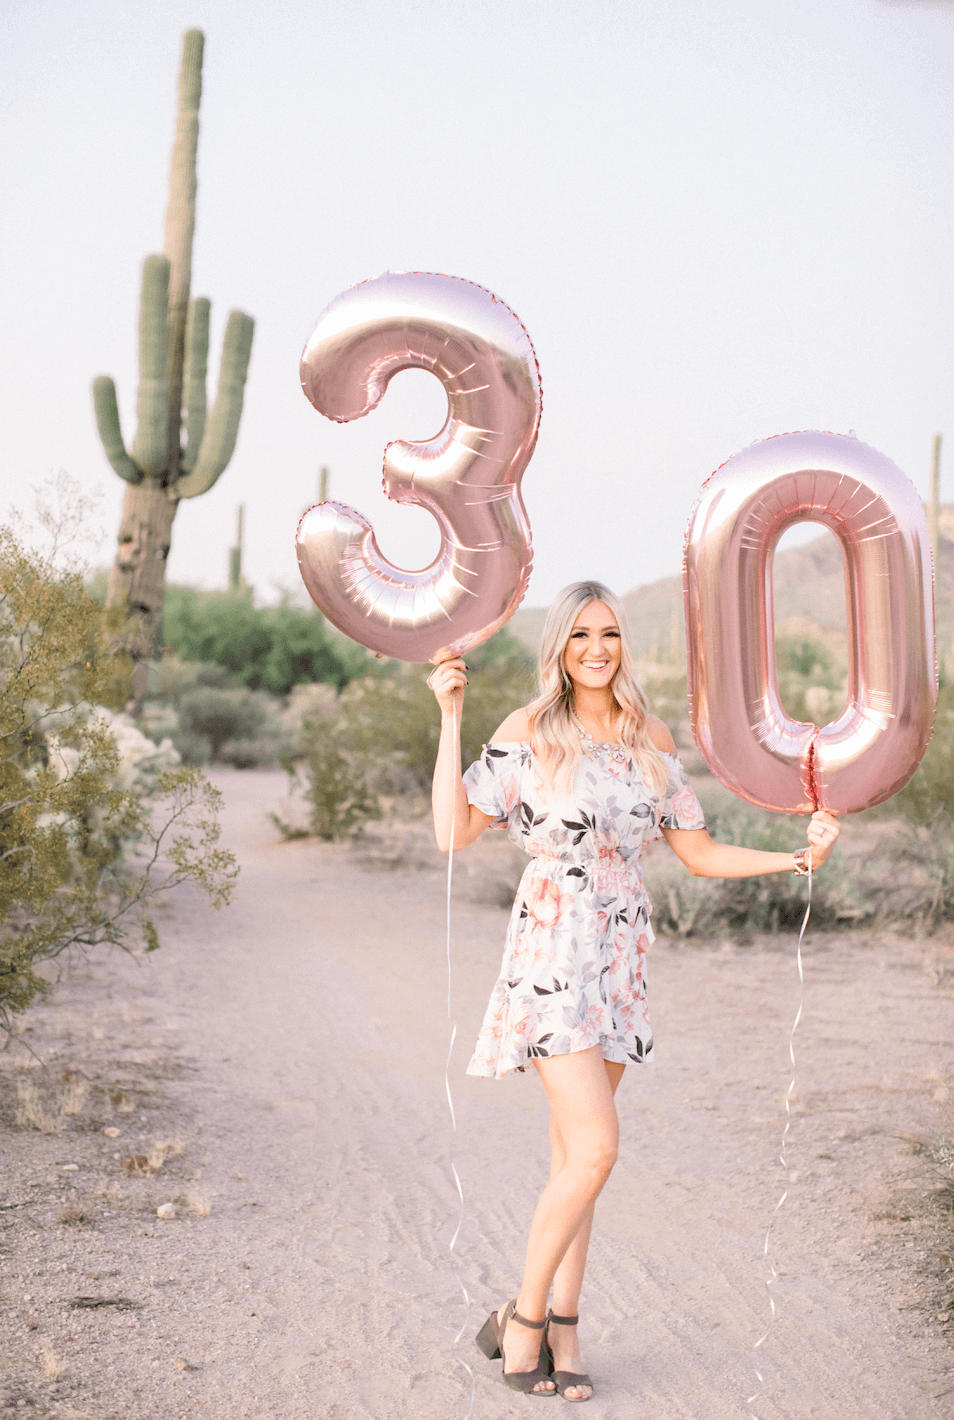 I just turned 30 this year and feel truly thankful for all of life's lessons! Click here to find out 30 things I've learned at 30 years old!